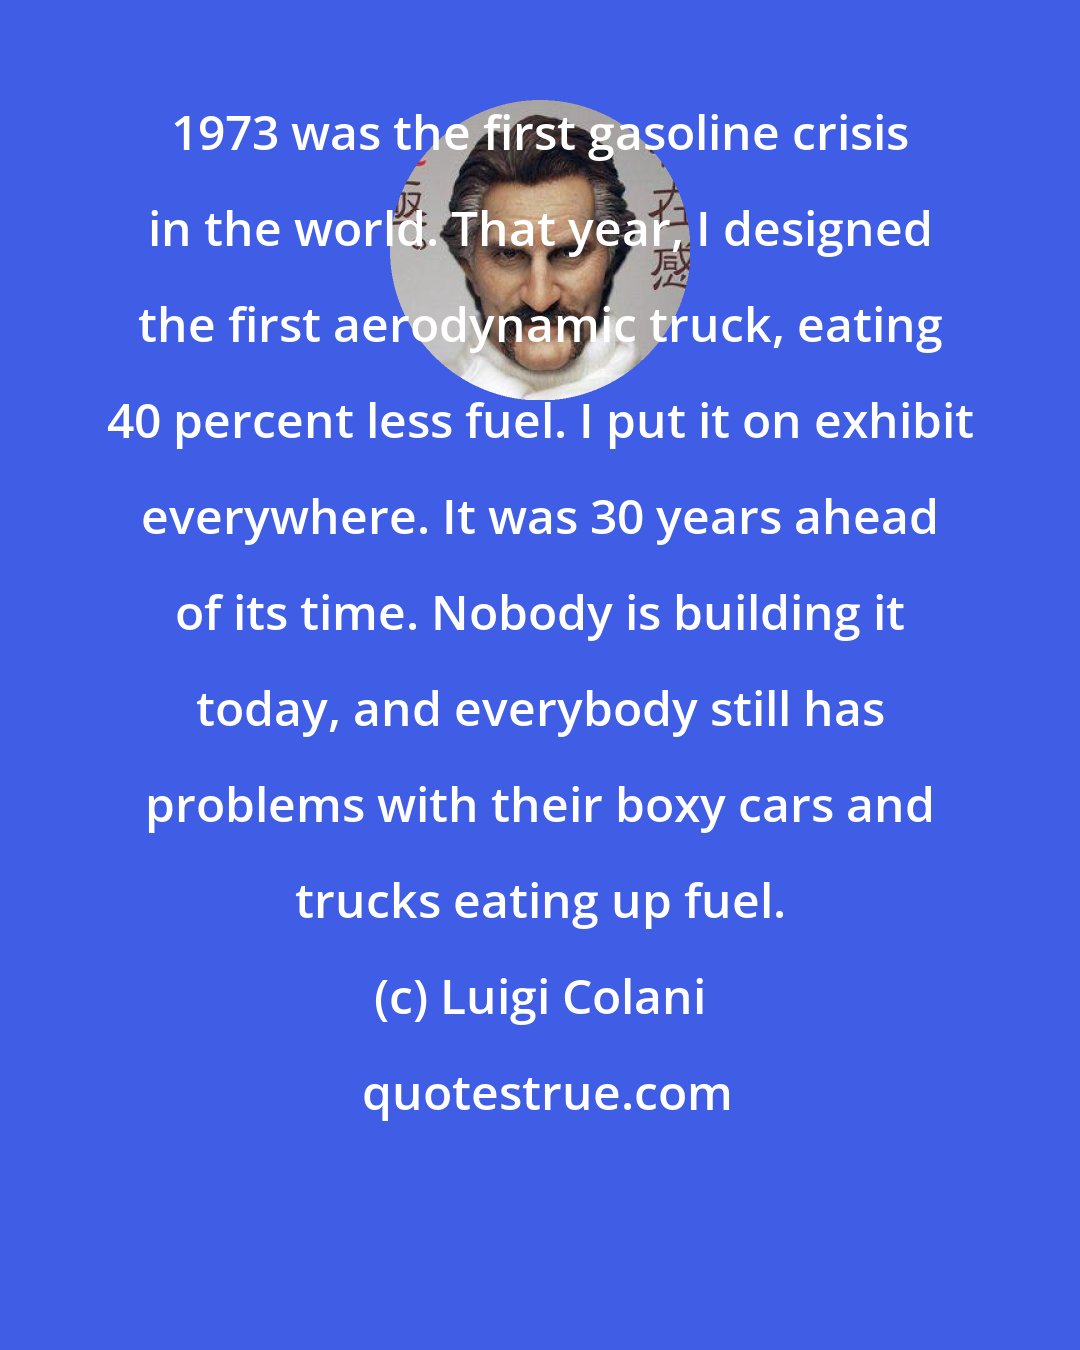 Luigi Colani: 1973 was the first gasoline crisis in the world. That year, I designed the first aerodynamic truck, eating 40 percent less fuel. I put it on exhibit everywhere. It was 30 years ahead of its time. Nobody is building it today, and everybody still has problems with their boxy cars and trucks eating up fuel.